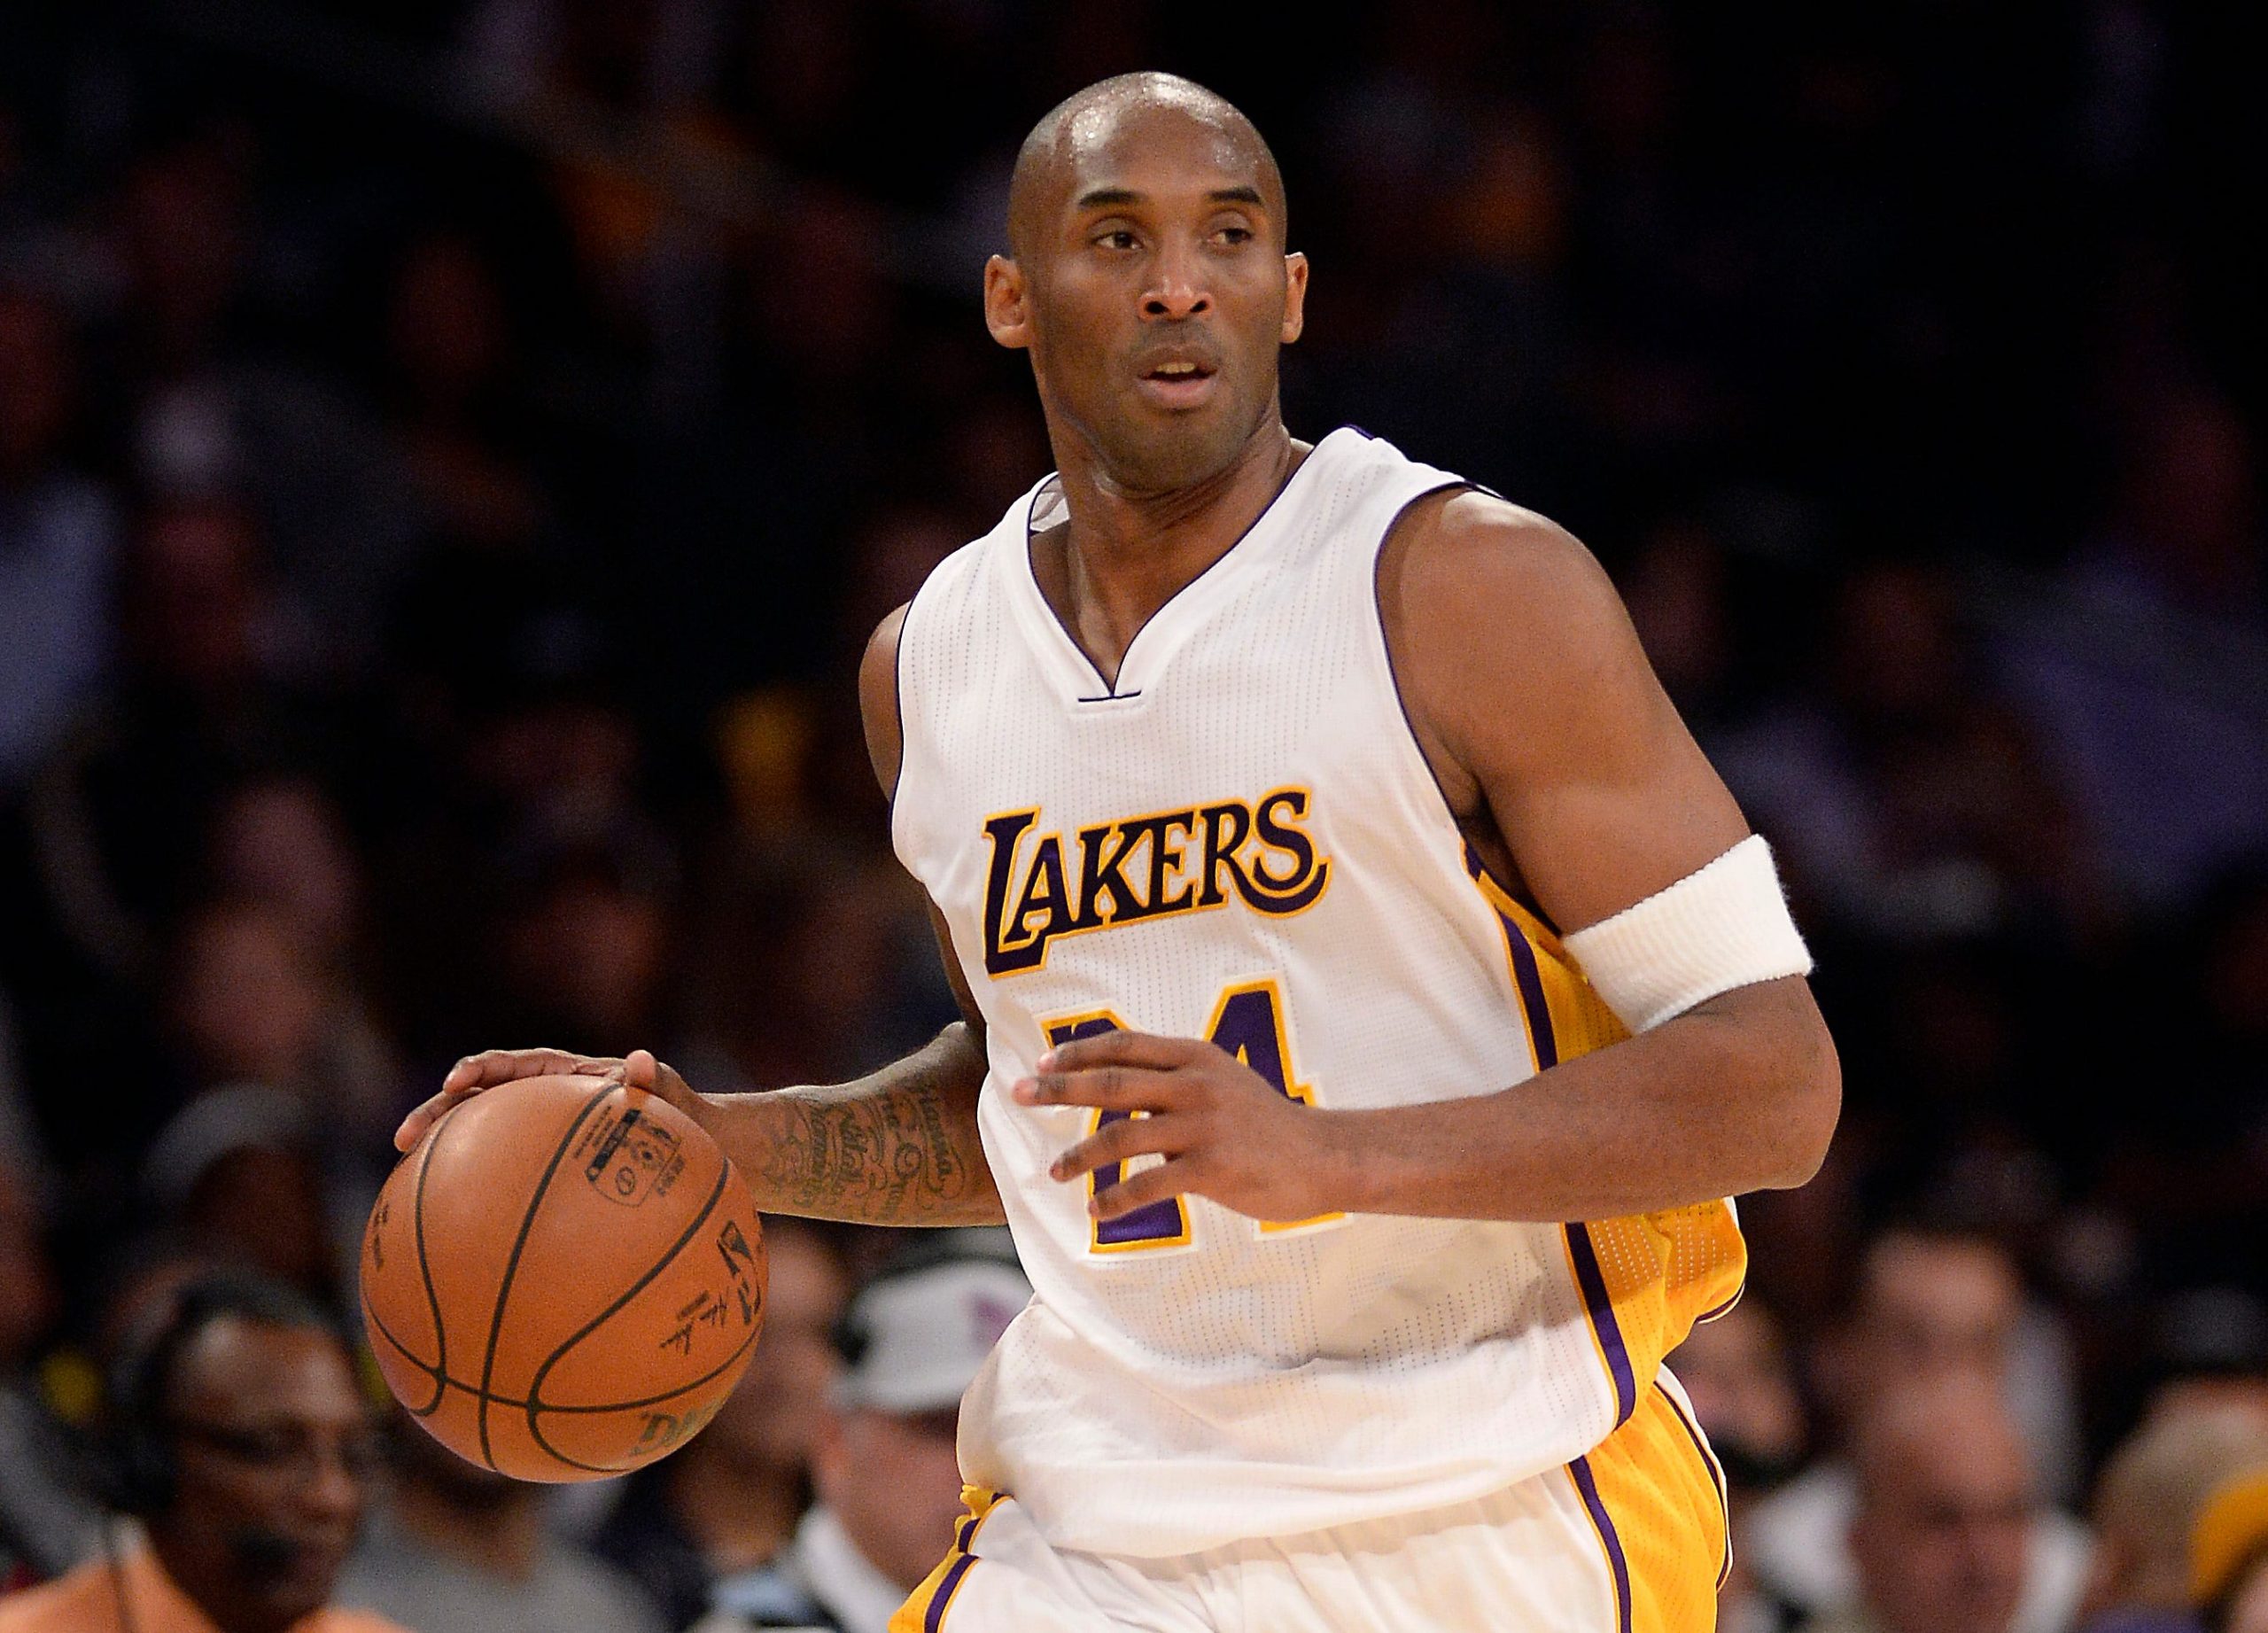 Kobe Bryant: NBA great inducted into Naismith Hall of Fame